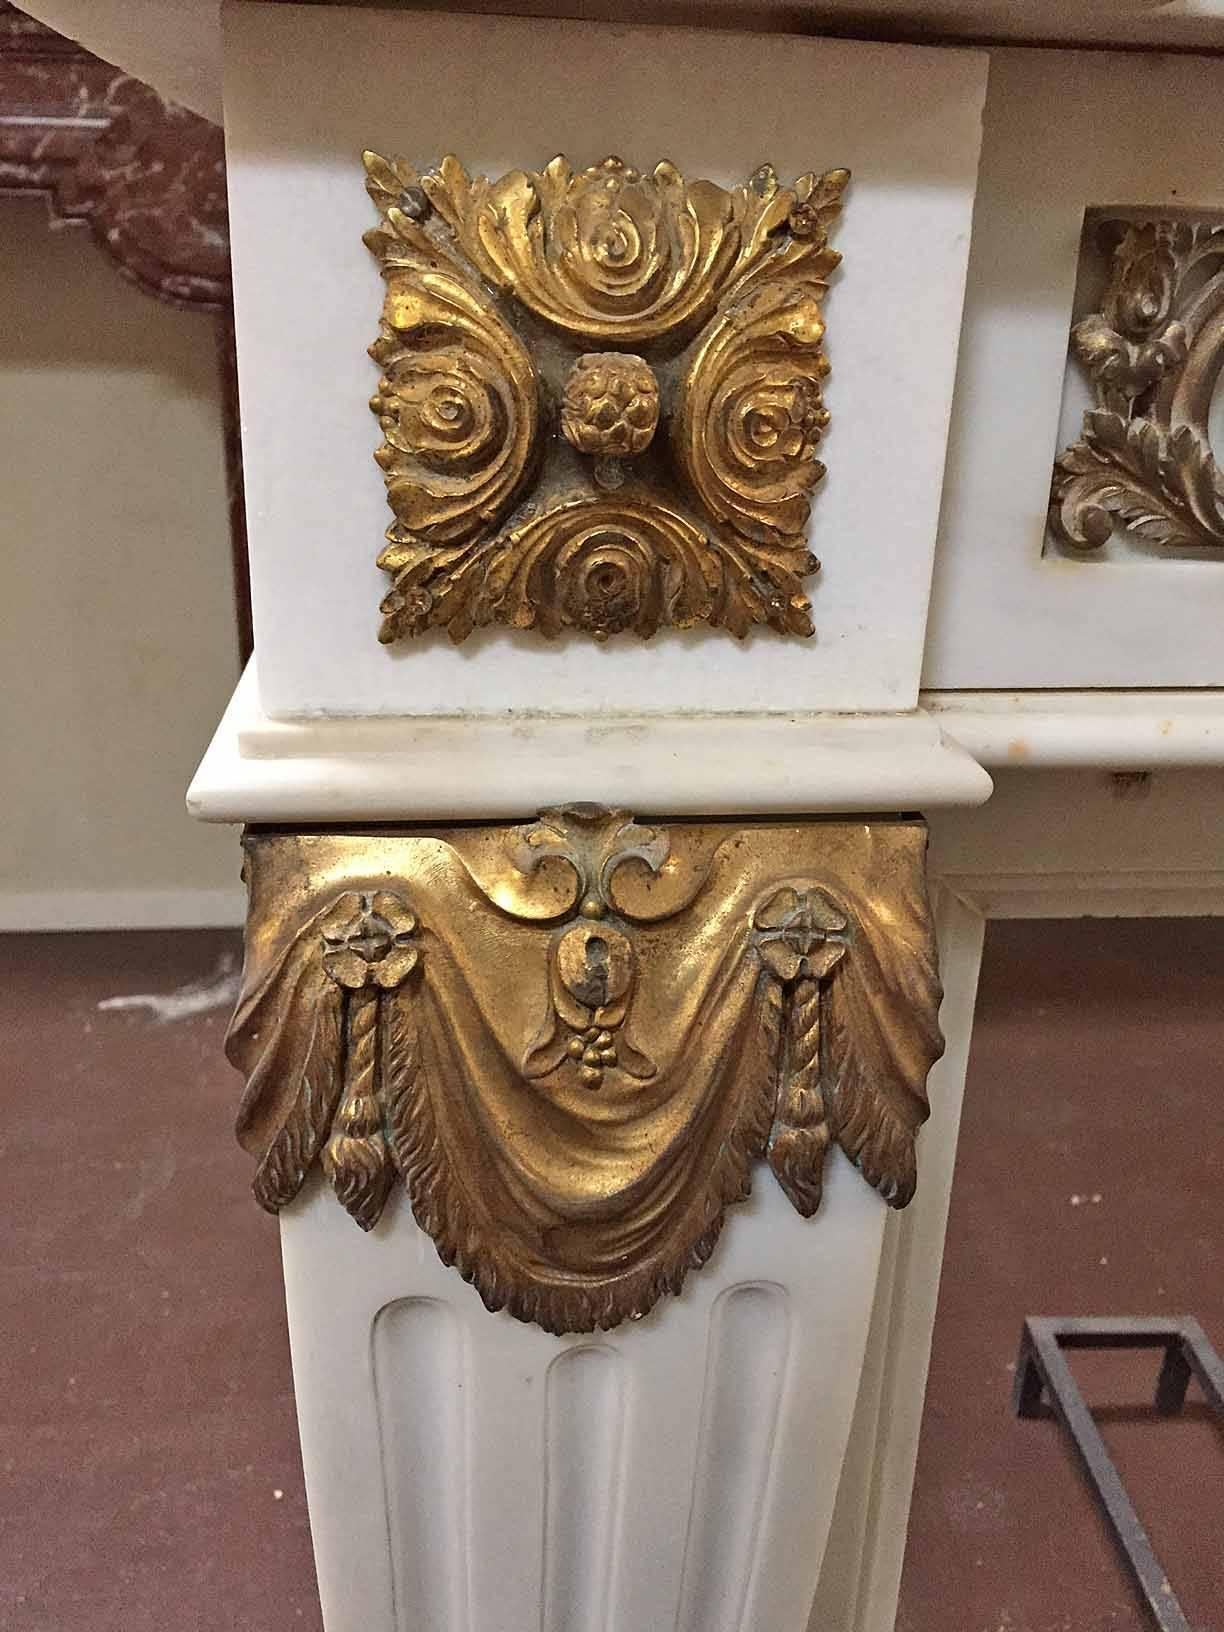 This French Carrara marble mantel bares bronze accents throughout the body. The bronze medallion reflects three cherubs playing as well as scroll-like designs across the lentil. The legs bare bronze drapes and reverse fluting. This is an exquisite